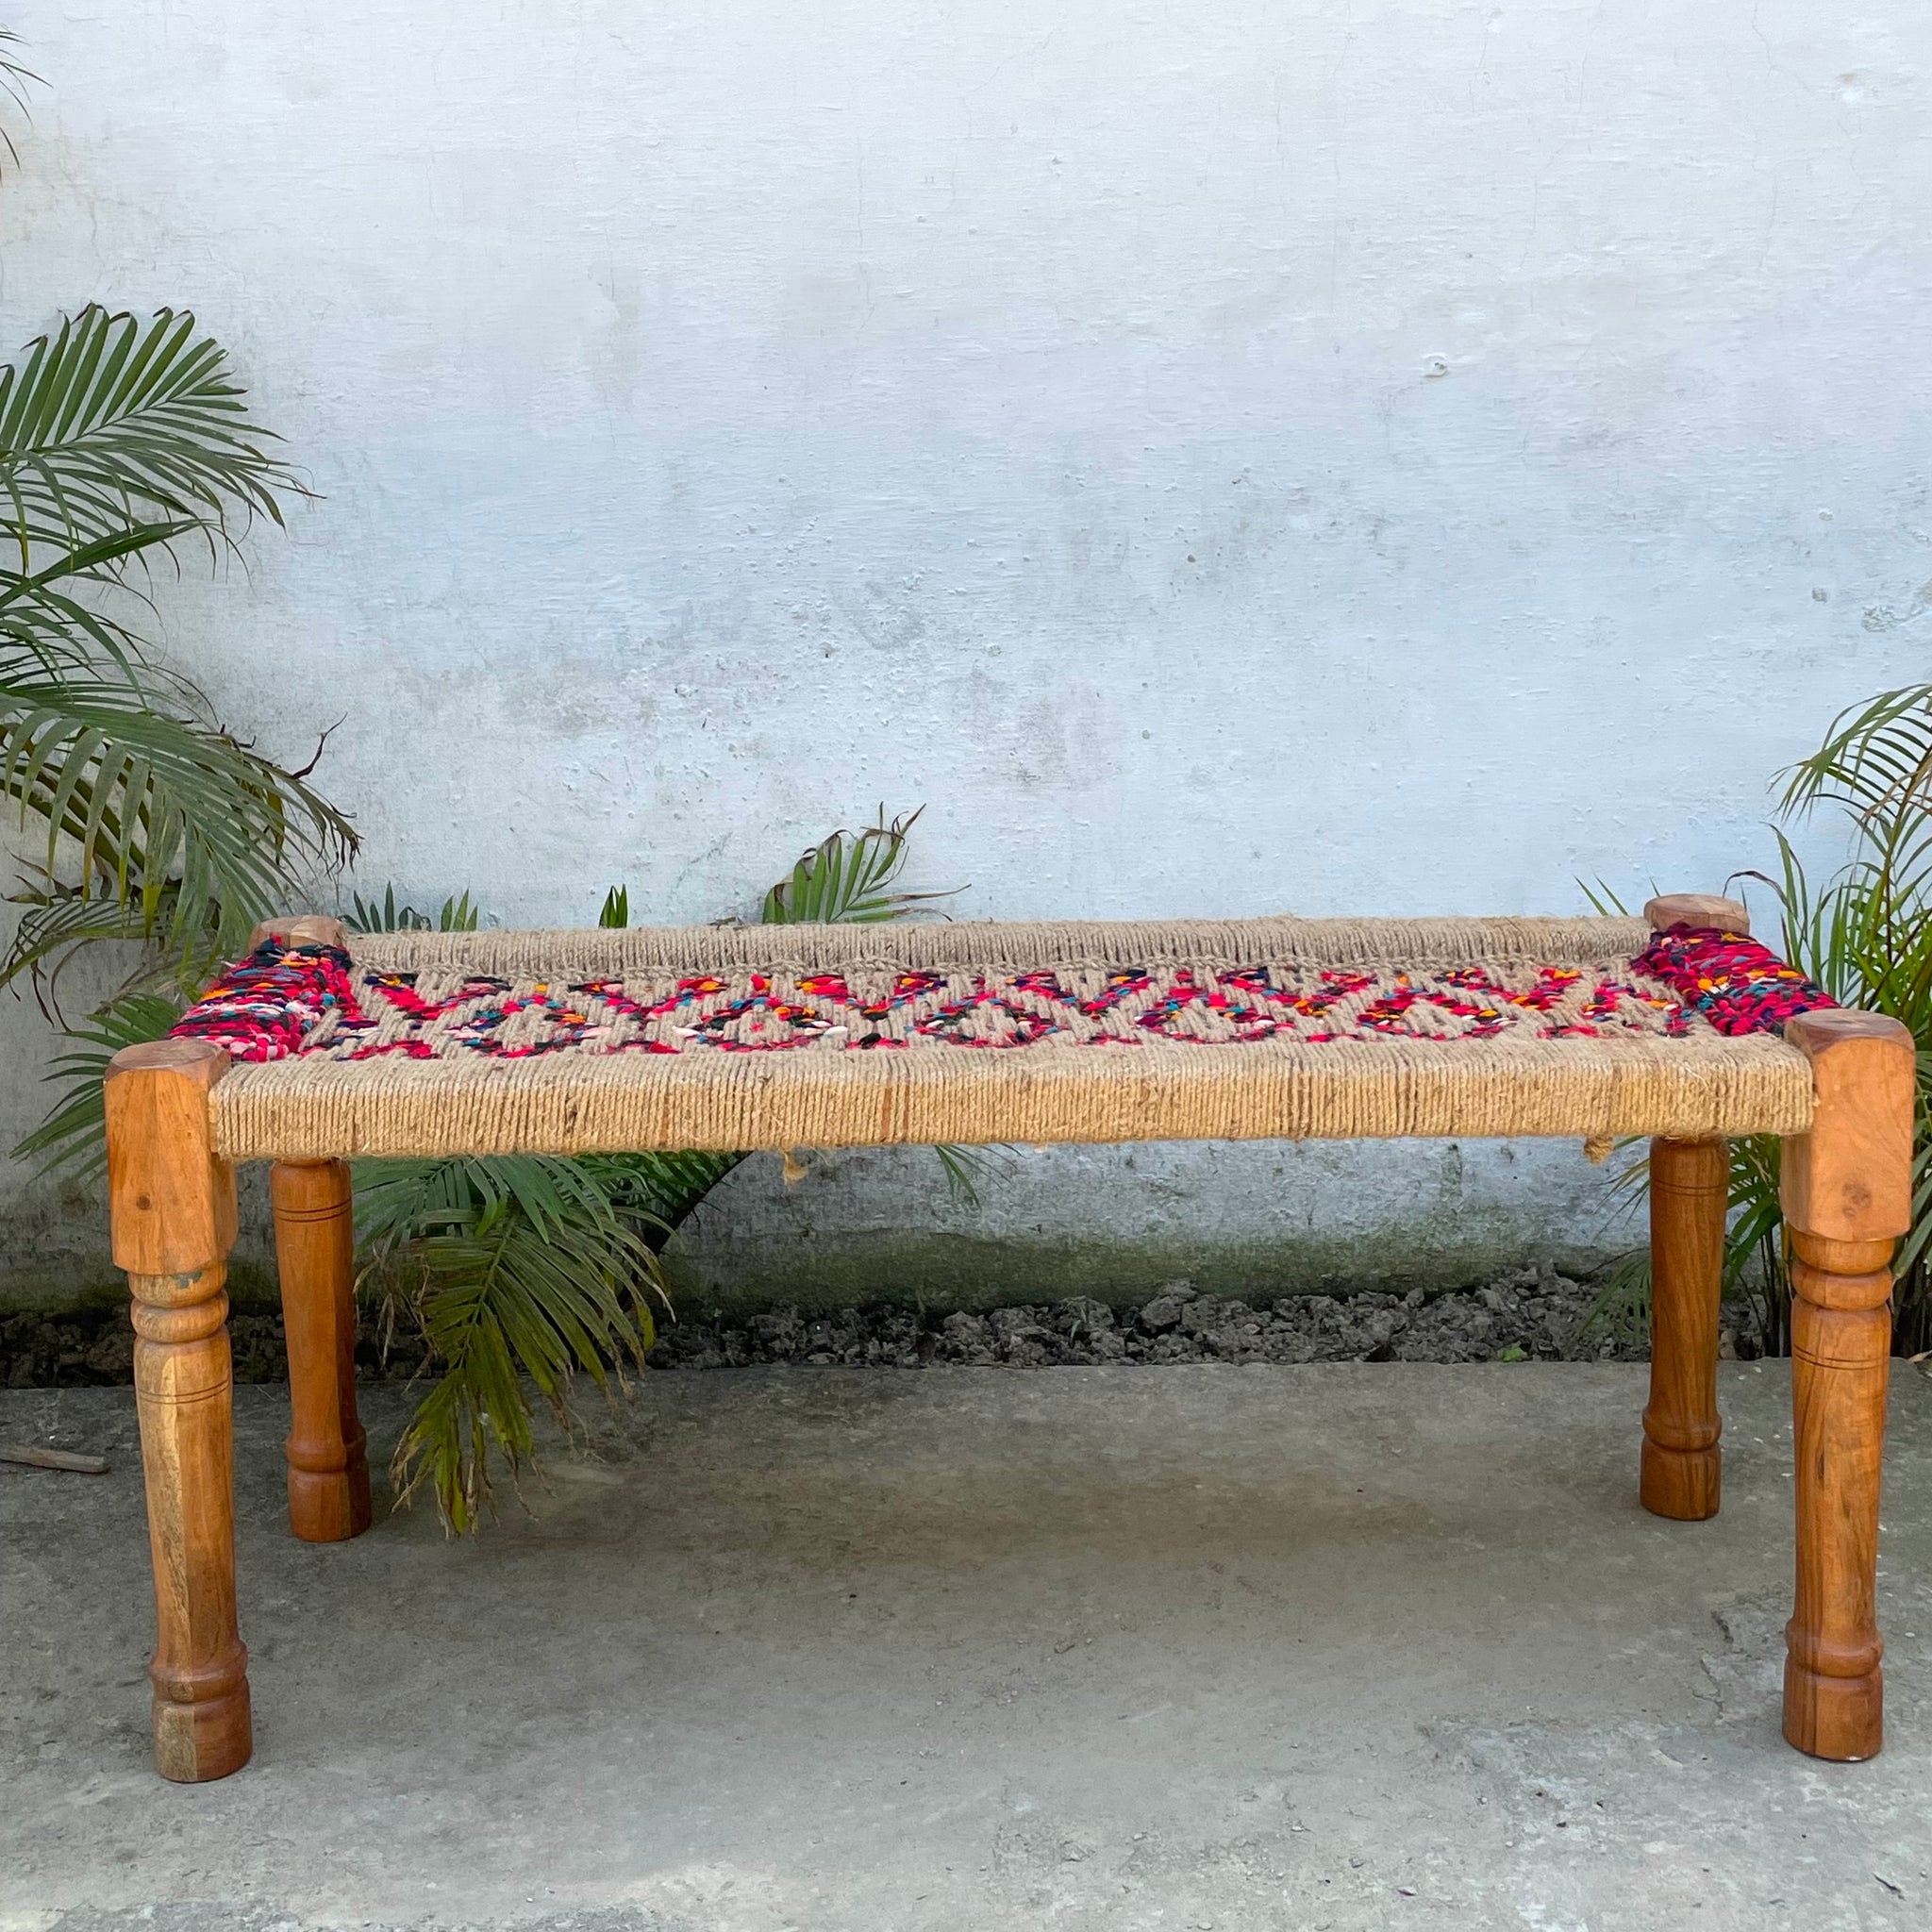 Handcrafted Rainbow Jute & Textile Wooden Bench